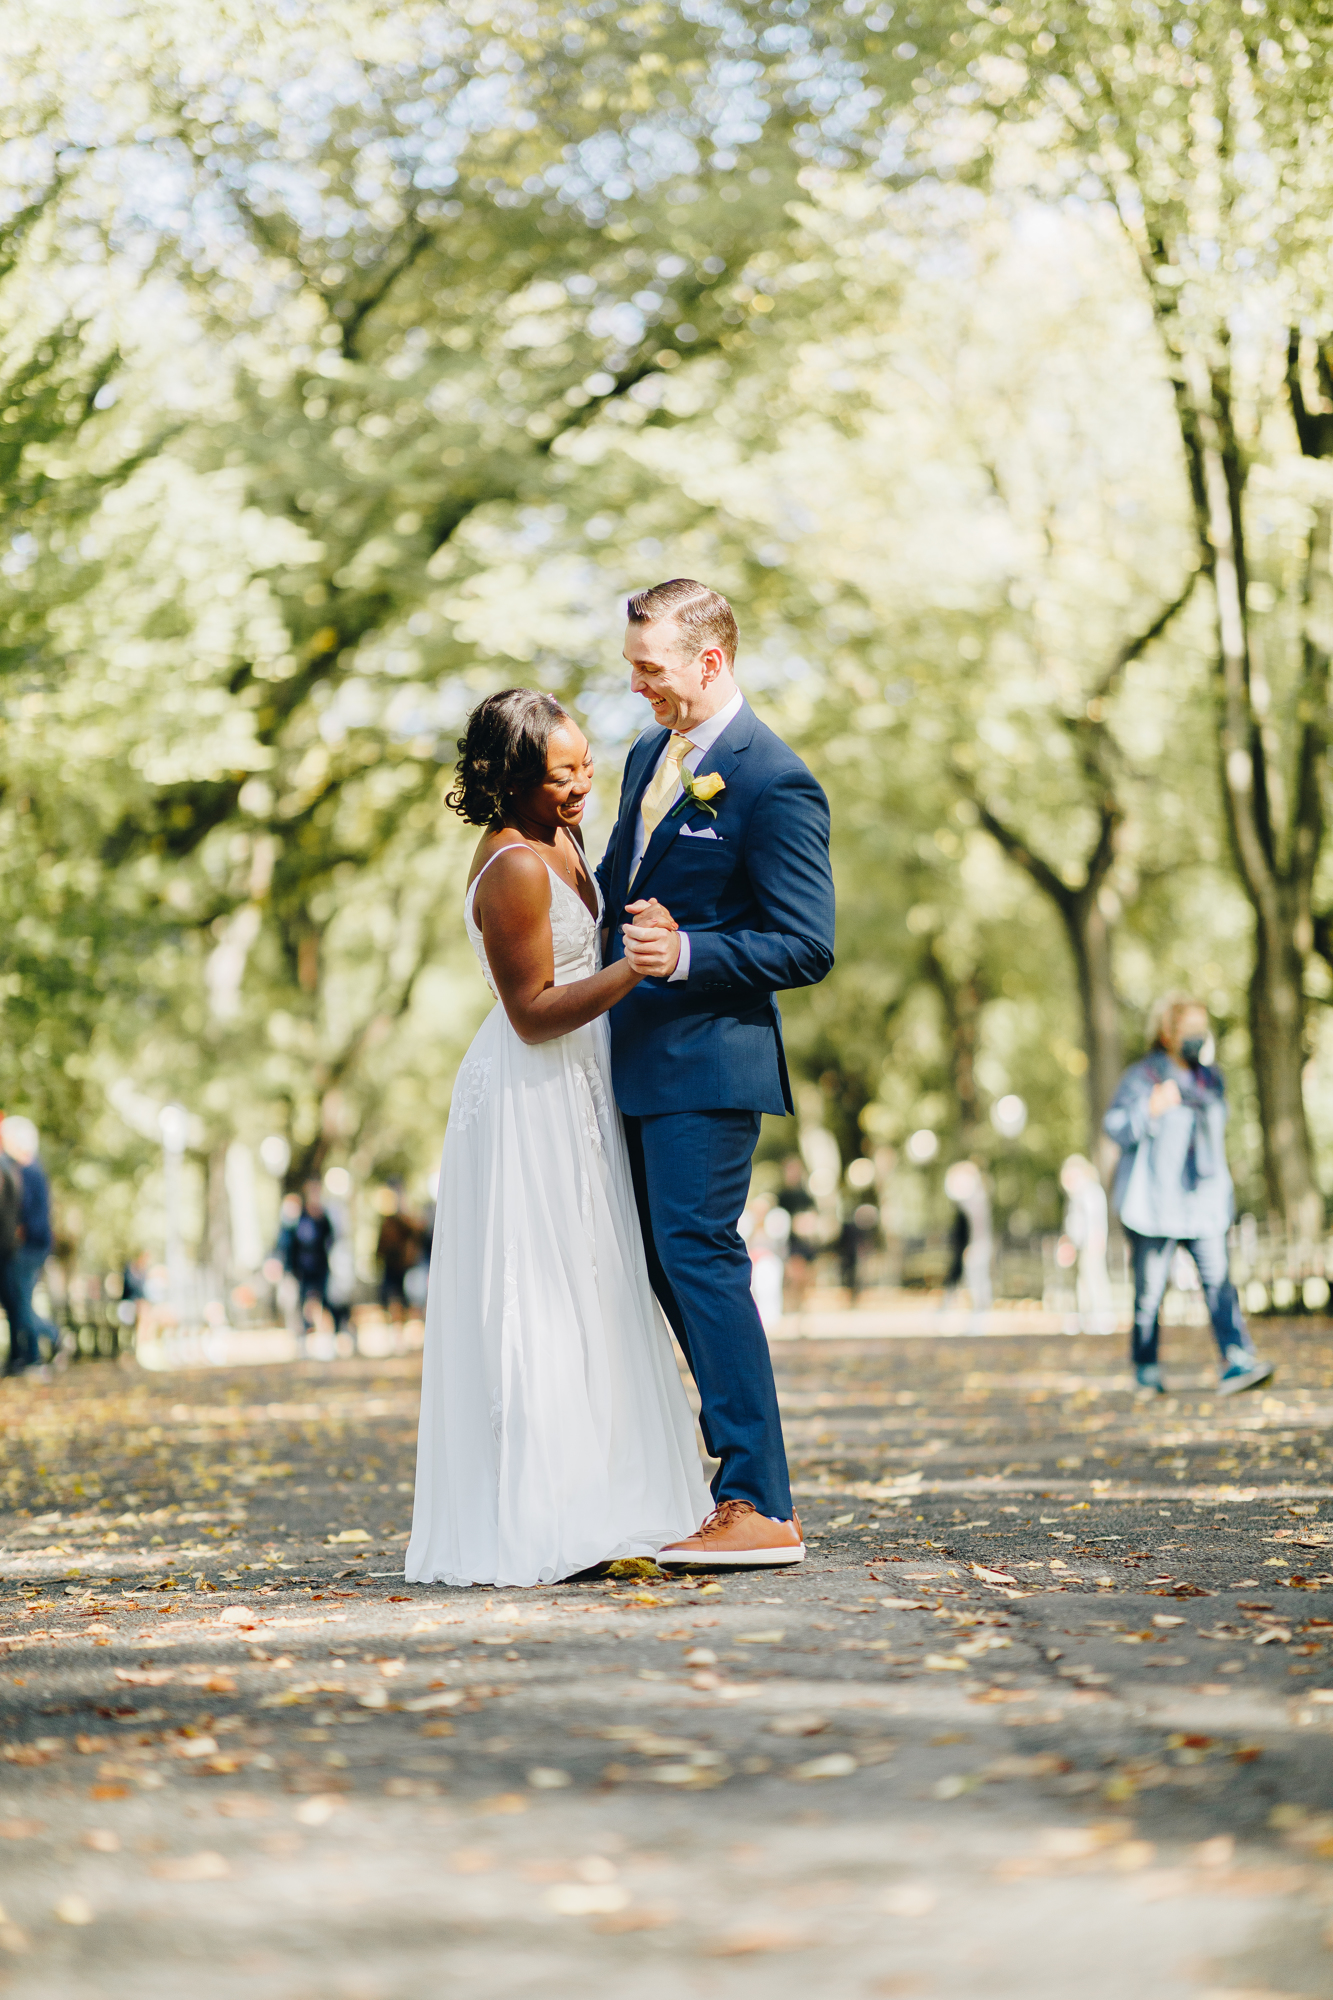 Fall Central Park Elopement Photos in NYC